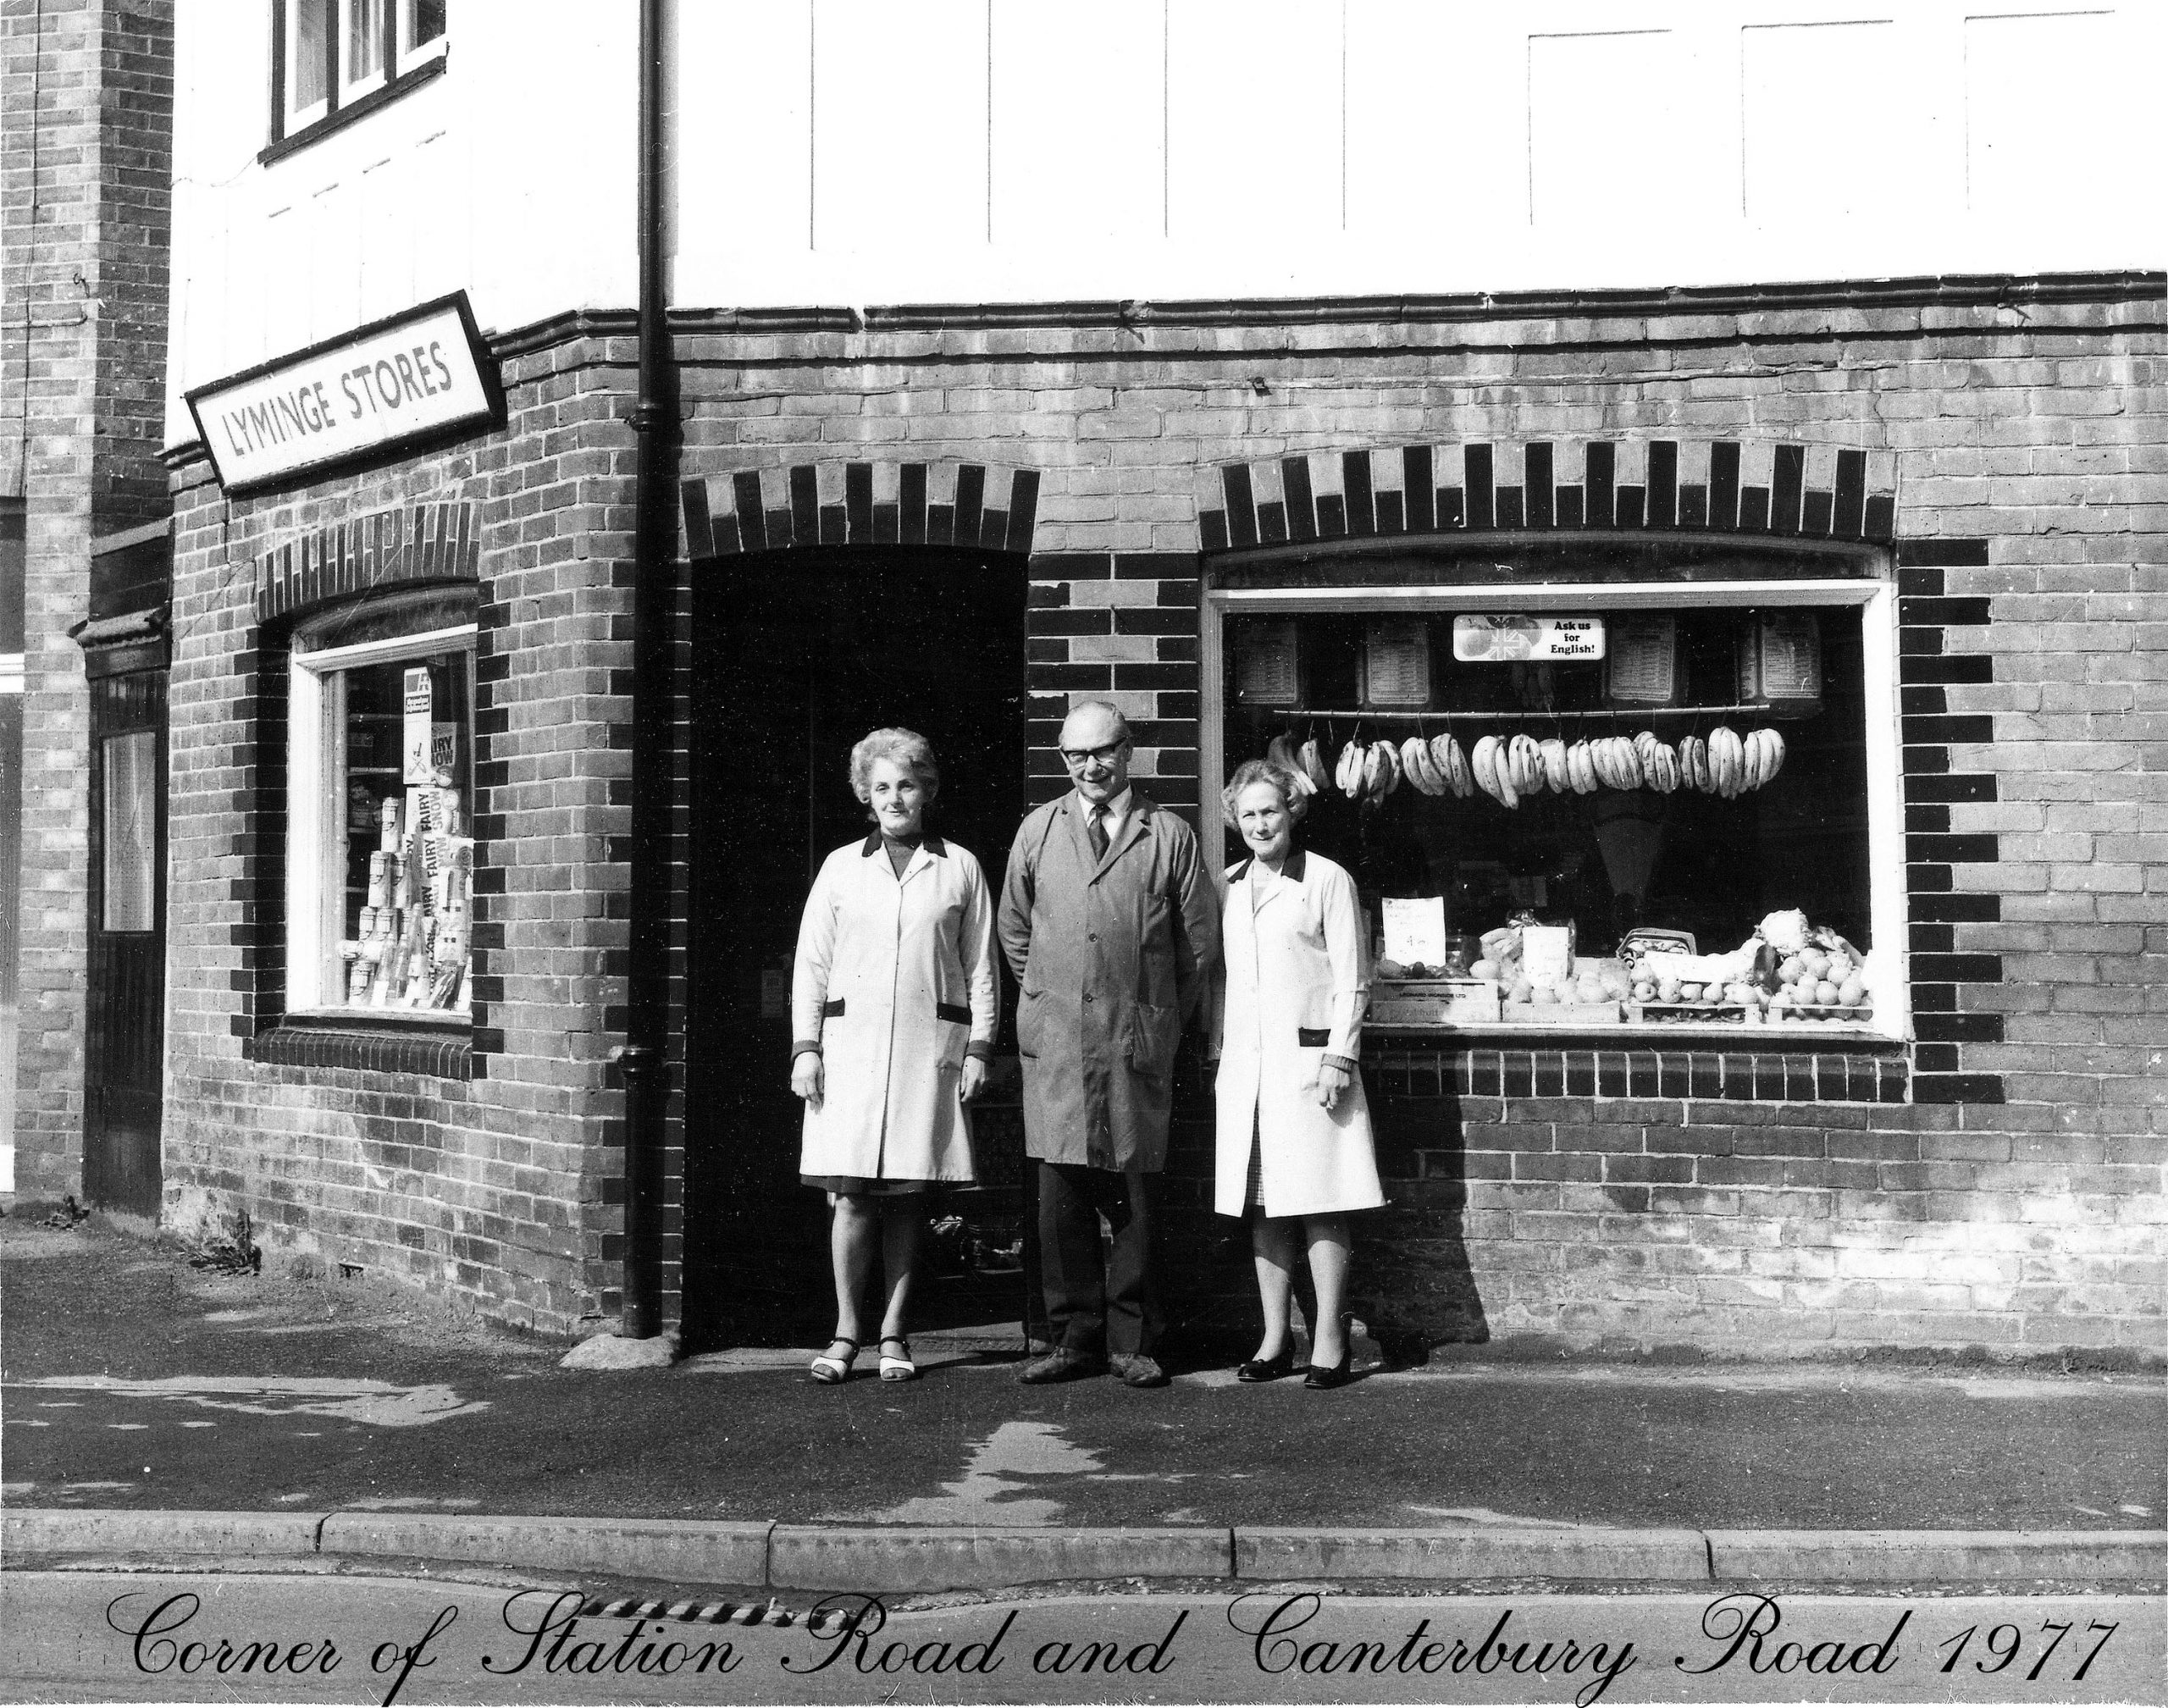 Lyminge Stores 1977, Cnr Station and Canterbury Rd